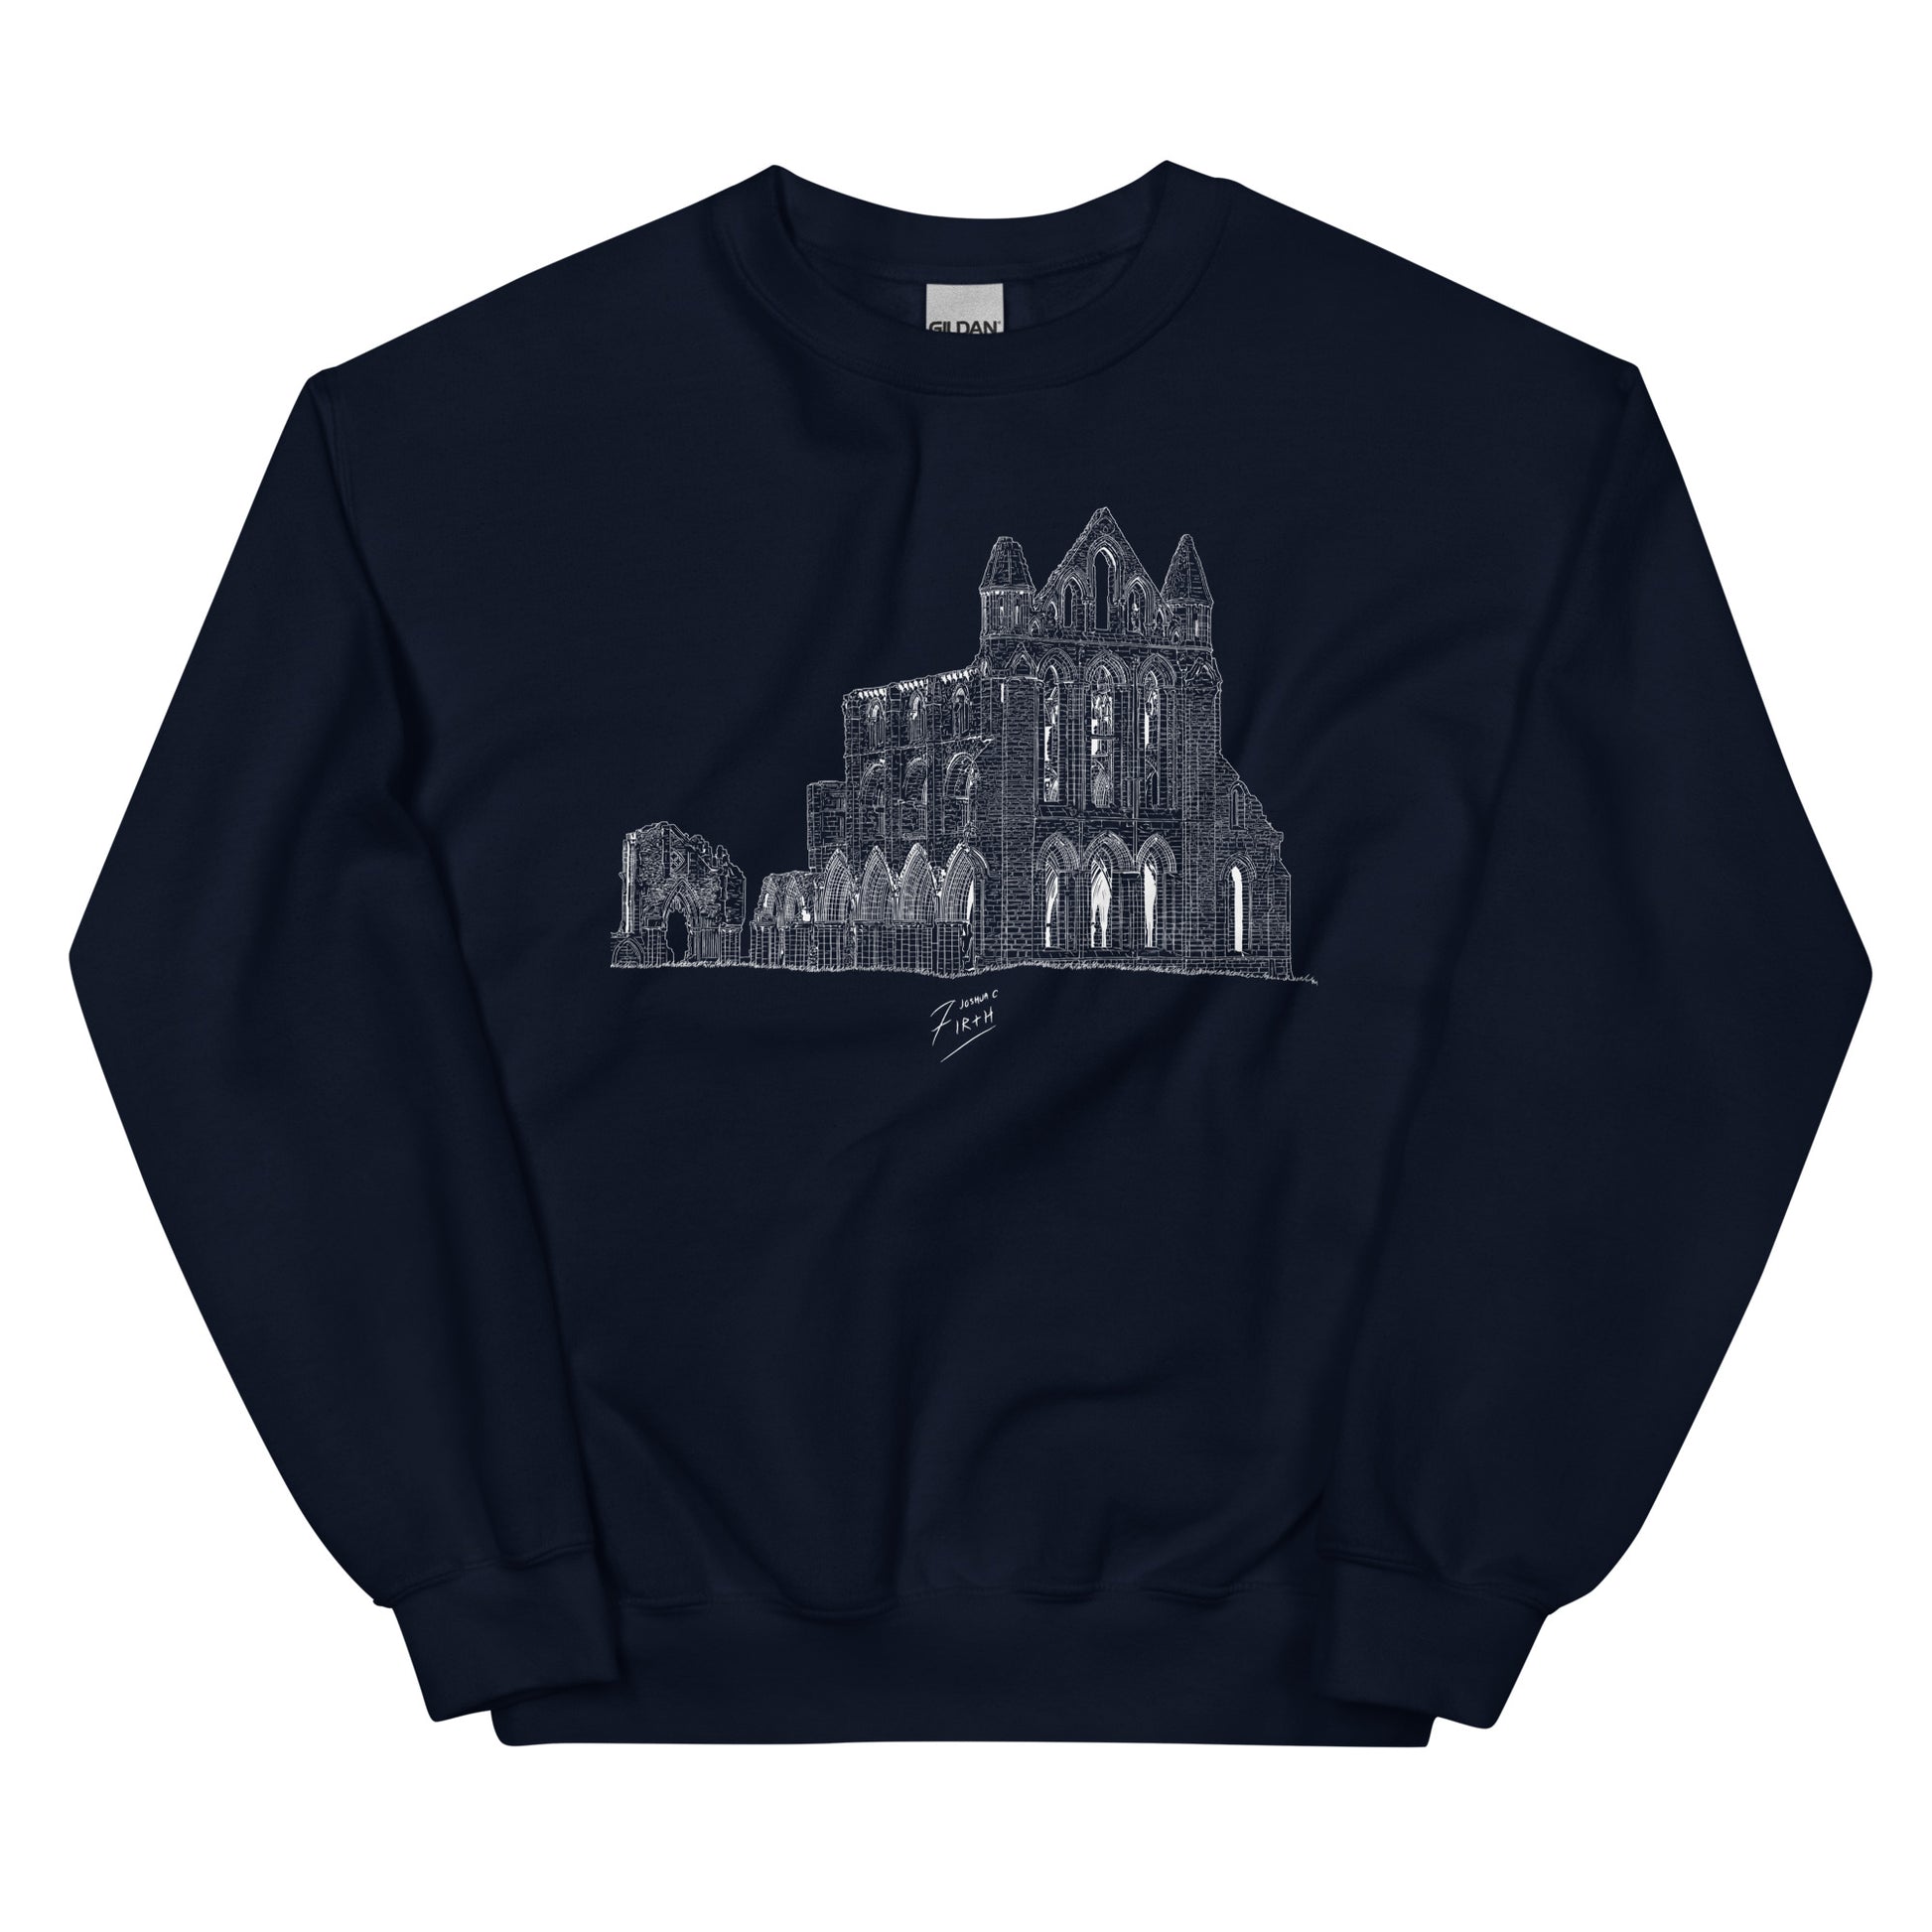 Whitby Abbey, North Yorkshire themed sweatshirt jumper. Navy Blue colour